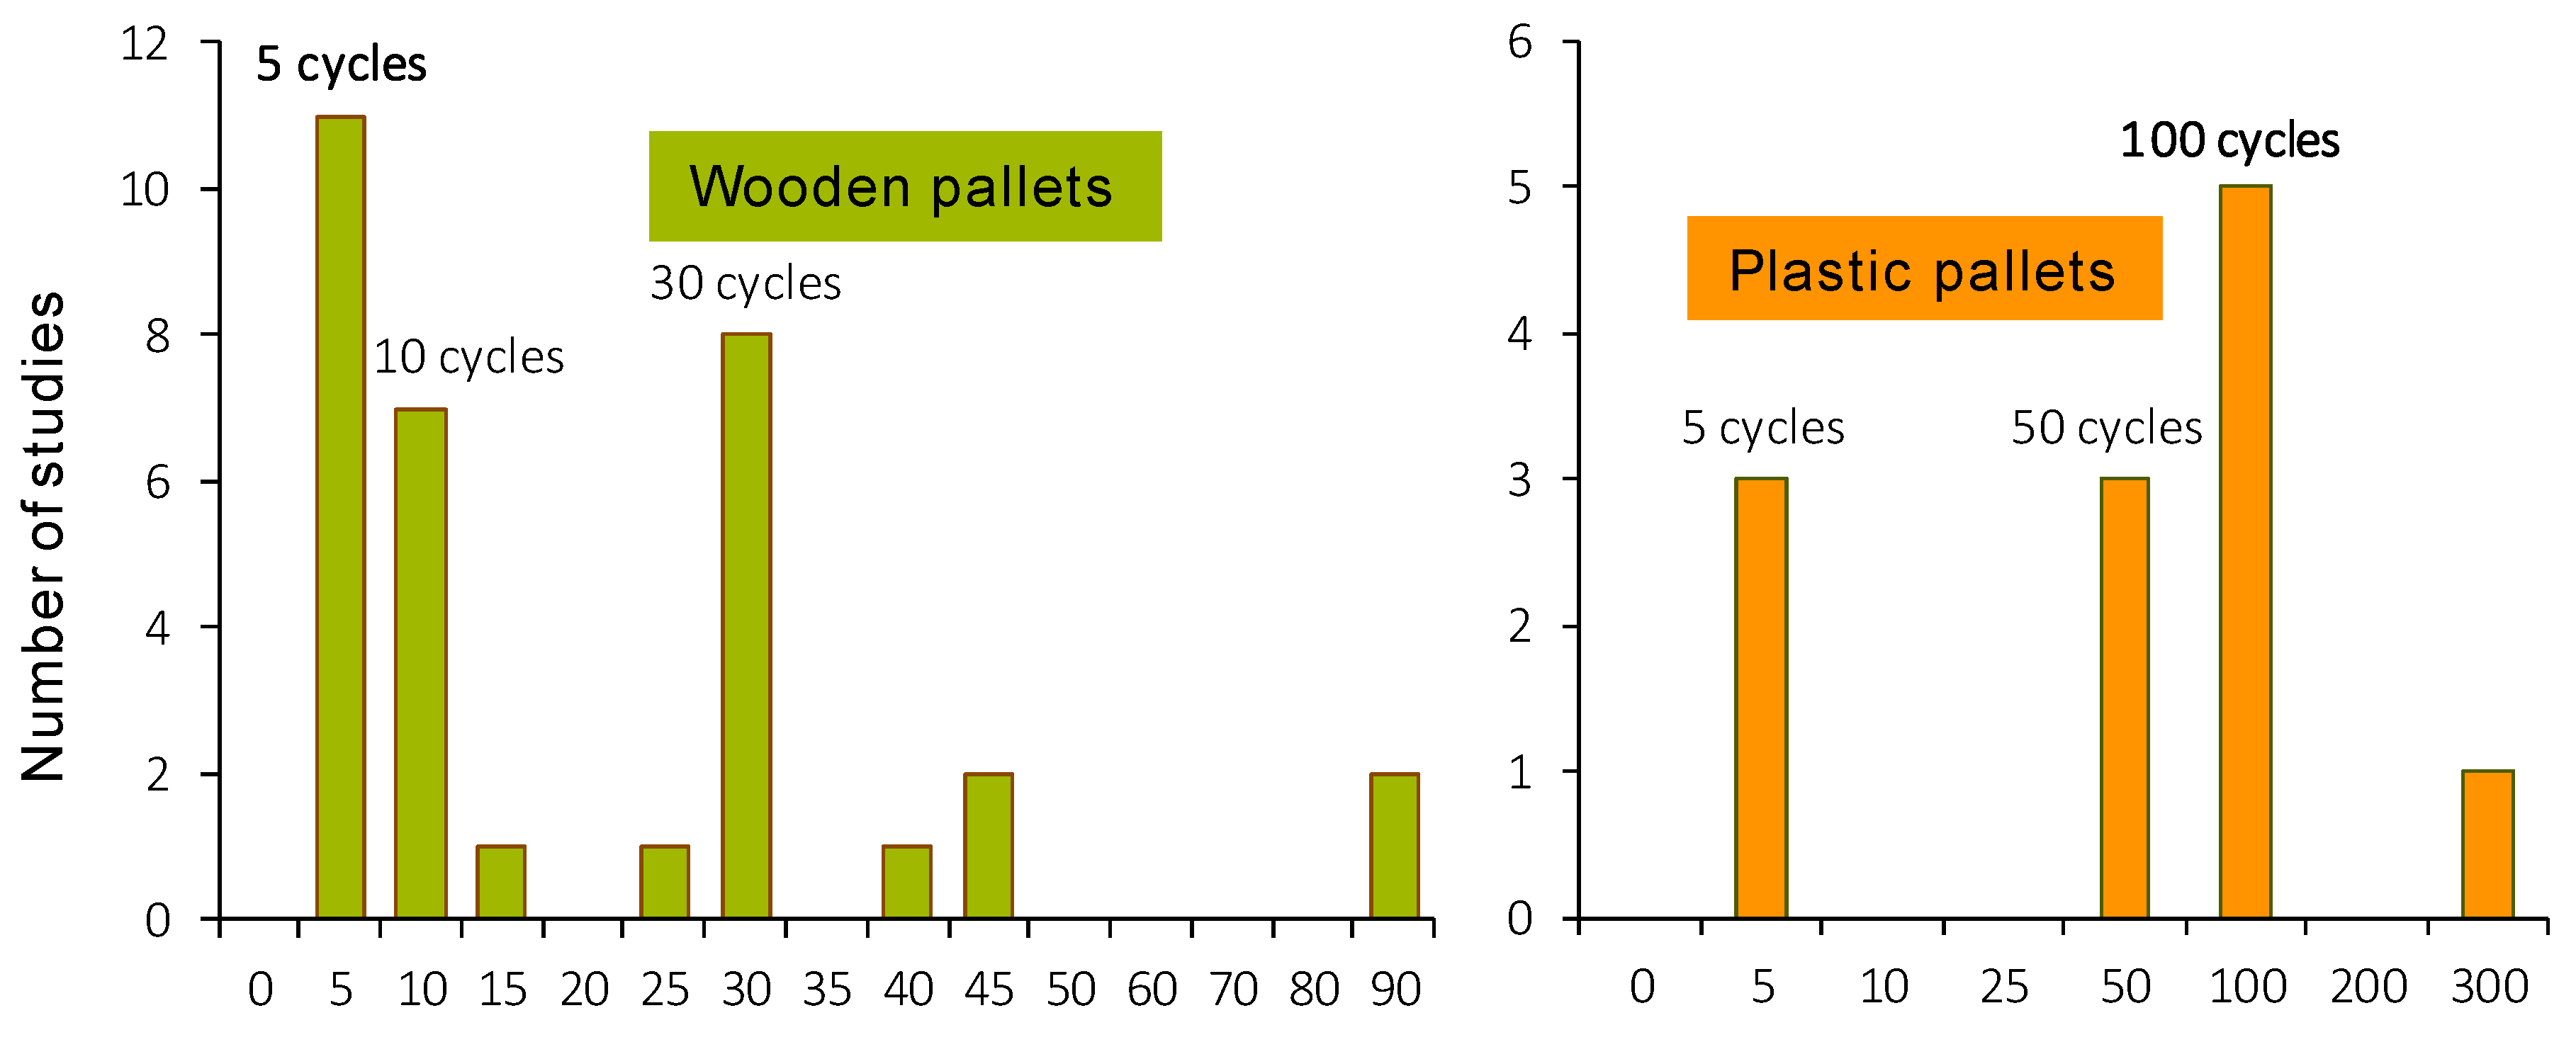 What Are the Differences Between Plastic and Wooden Pallets?